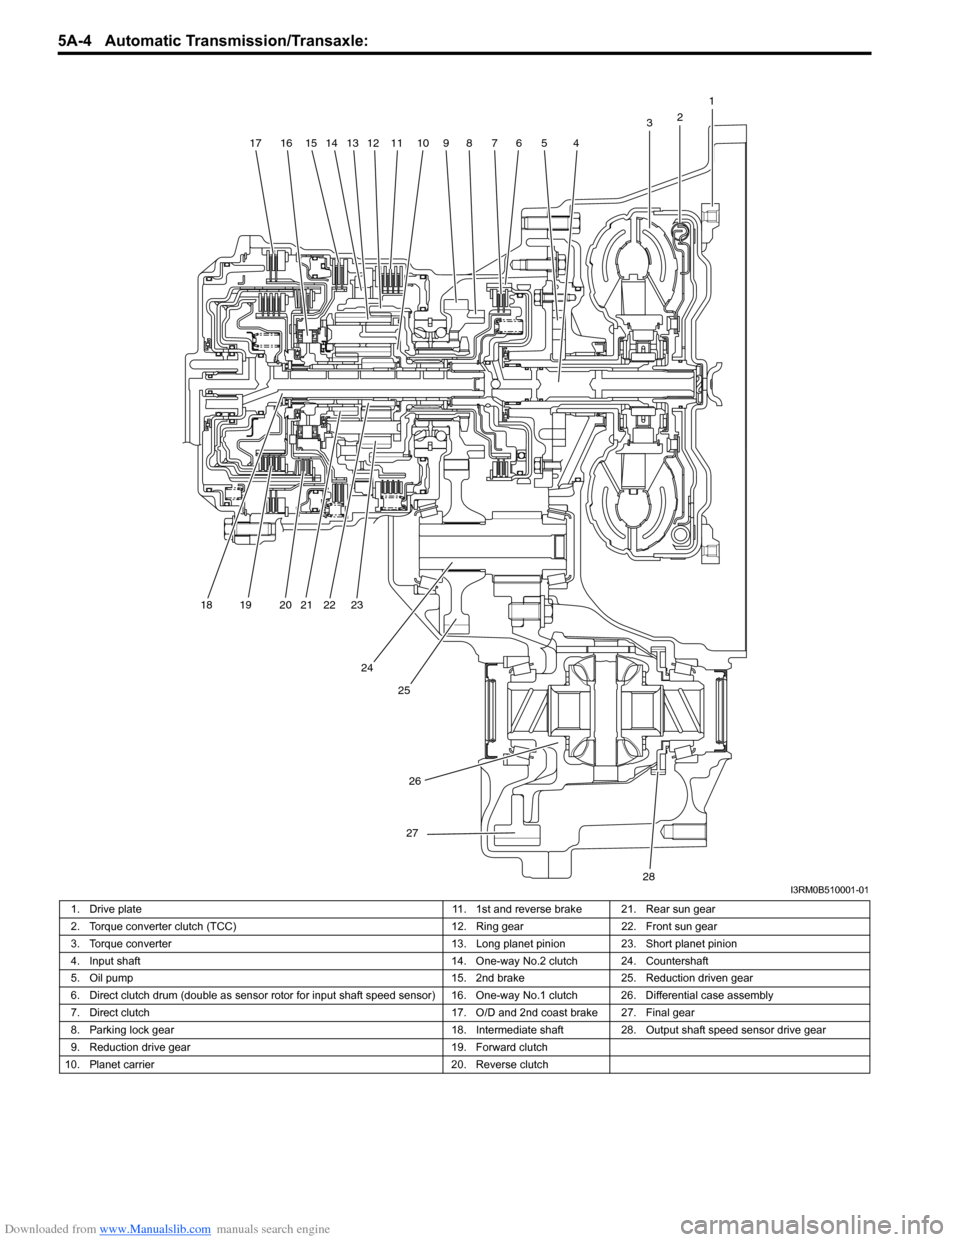 SUZUKI SWIFT 2007 2.G Service Workshop Manual Downloaded from www.Manualslib.com manuals search engine 5A-4 Automatic Transmission/Transaxle: 
1
2
3
4567891011121314151617
18 19 20 21 22 23
24 25
26
27
28I3RM0B510001-01
1. Drive plate 11. 1st and